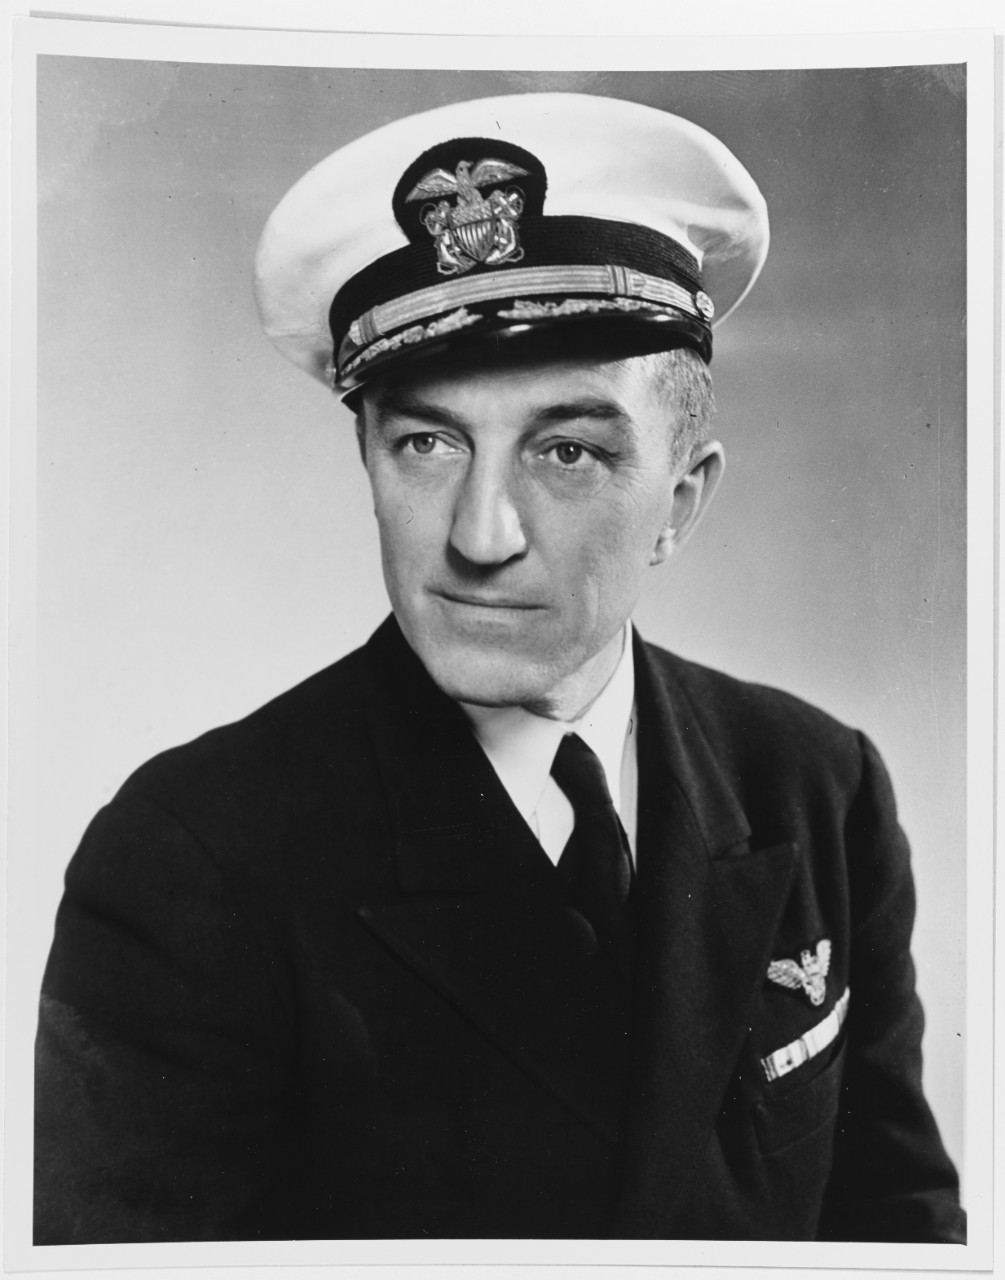 Admiral Thomas L. Sprague, US Navy. Photographic Section, Naval History and Heritage Command, #80-G-66889.